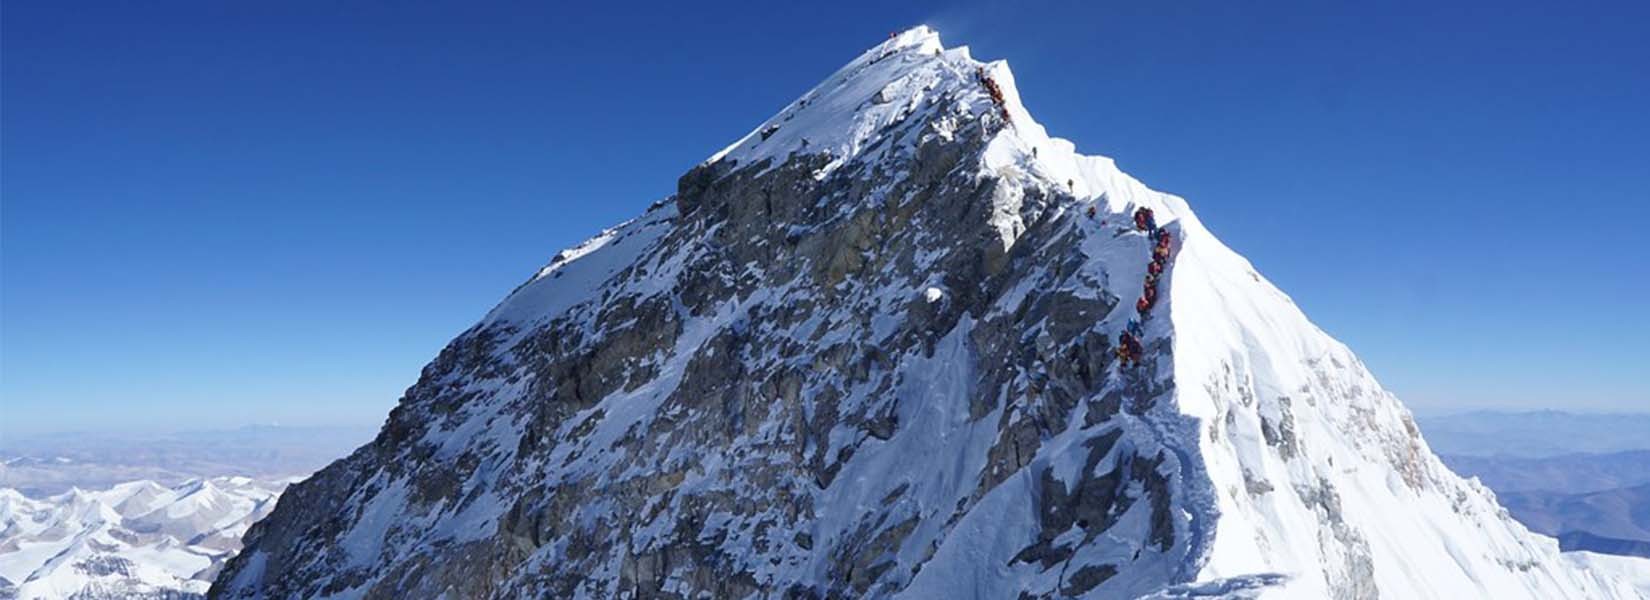 highest mountain in nepal